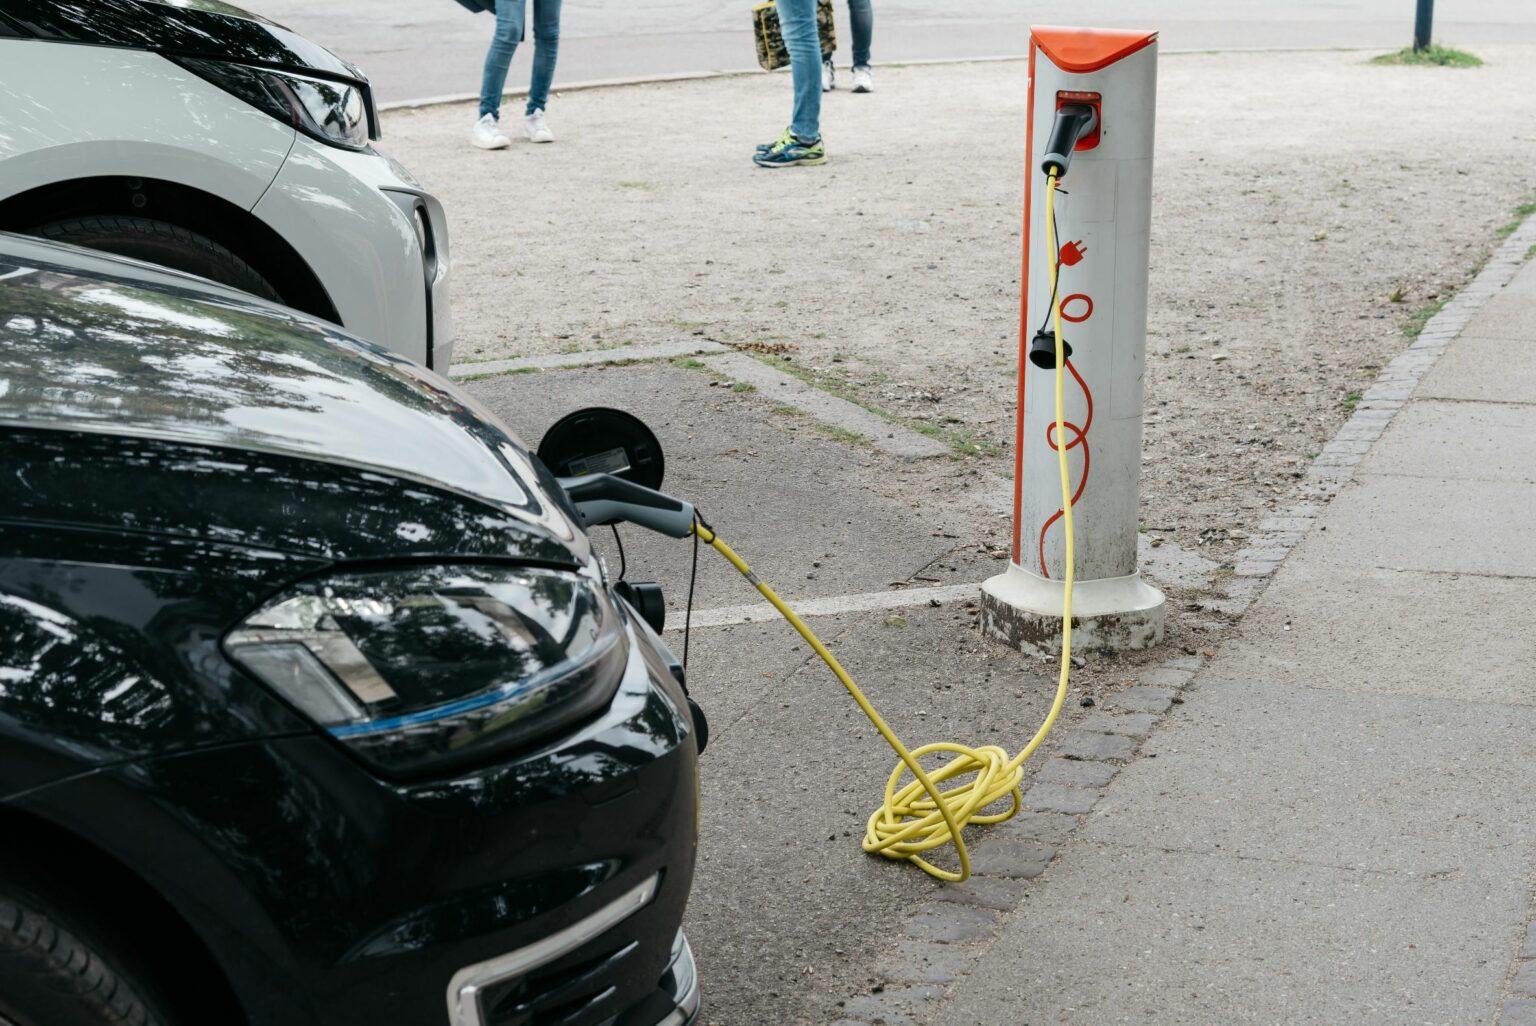 charging-an-electric-car-with-the-power-cable-supp-2021-09-01-10-43-31-utc